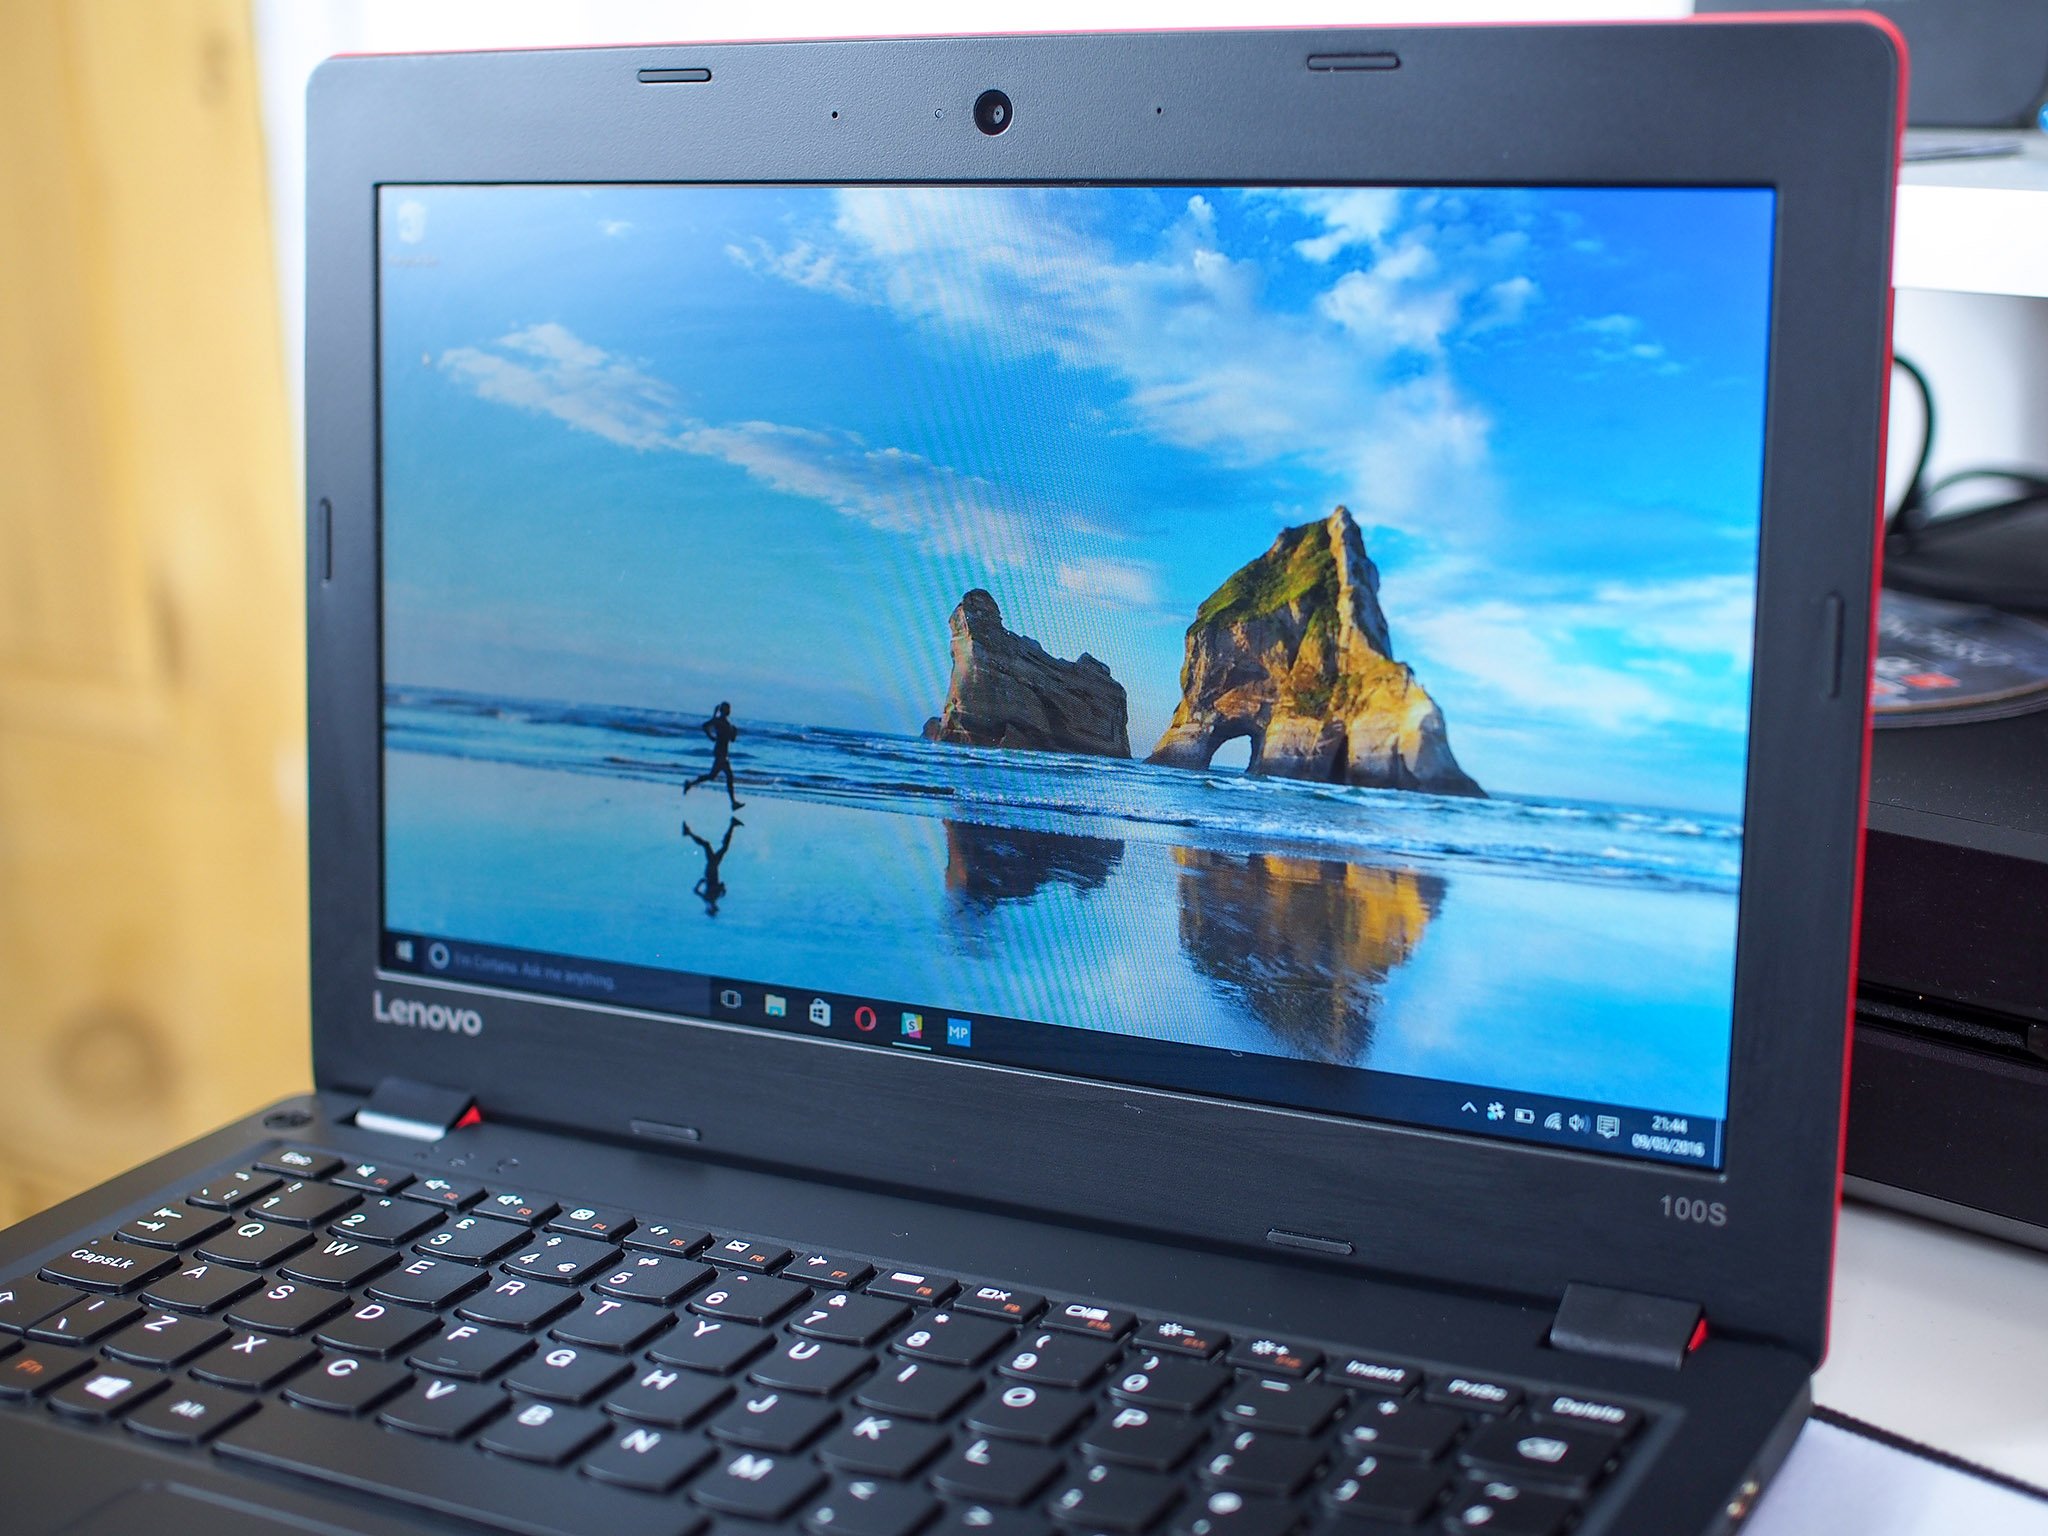 Lenovo Ideapad 100s Review Cheap And Worth The Attention Windows Central 4797